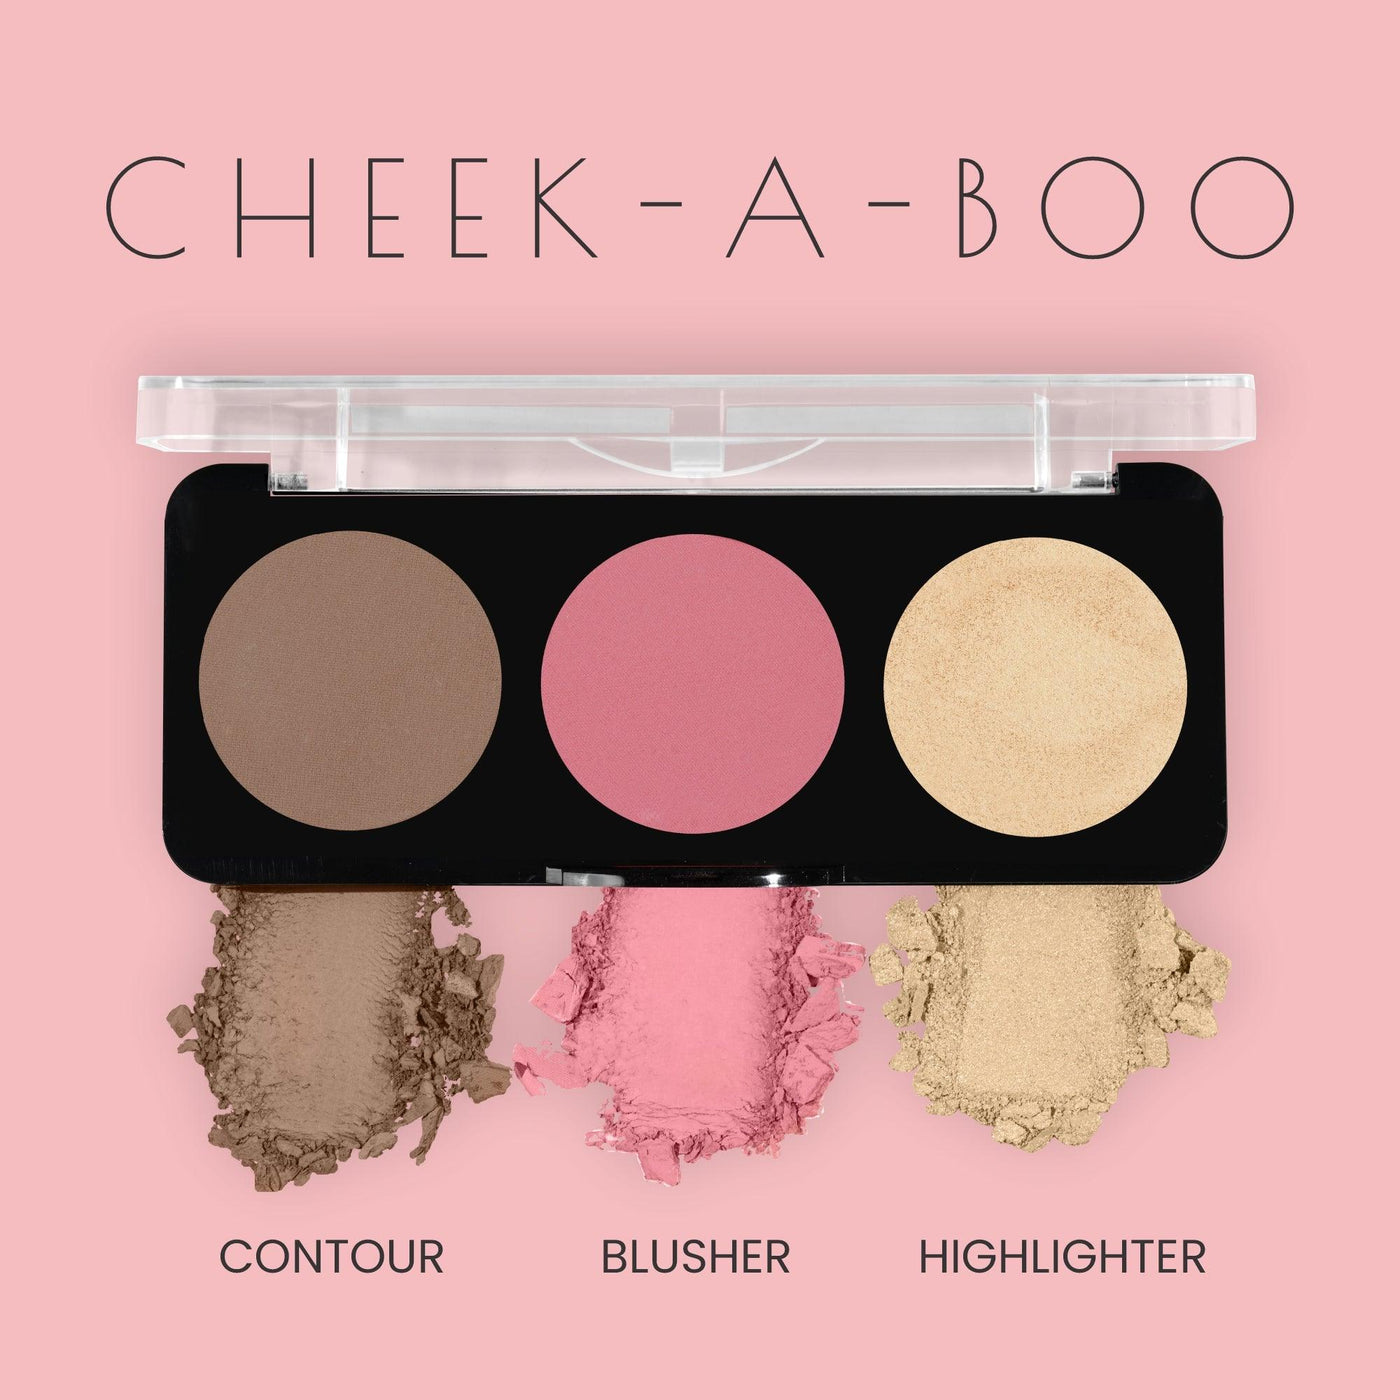 Buy Swiss Beauty Cheek-a-boo 3-in-1 Face Palette With Blusher